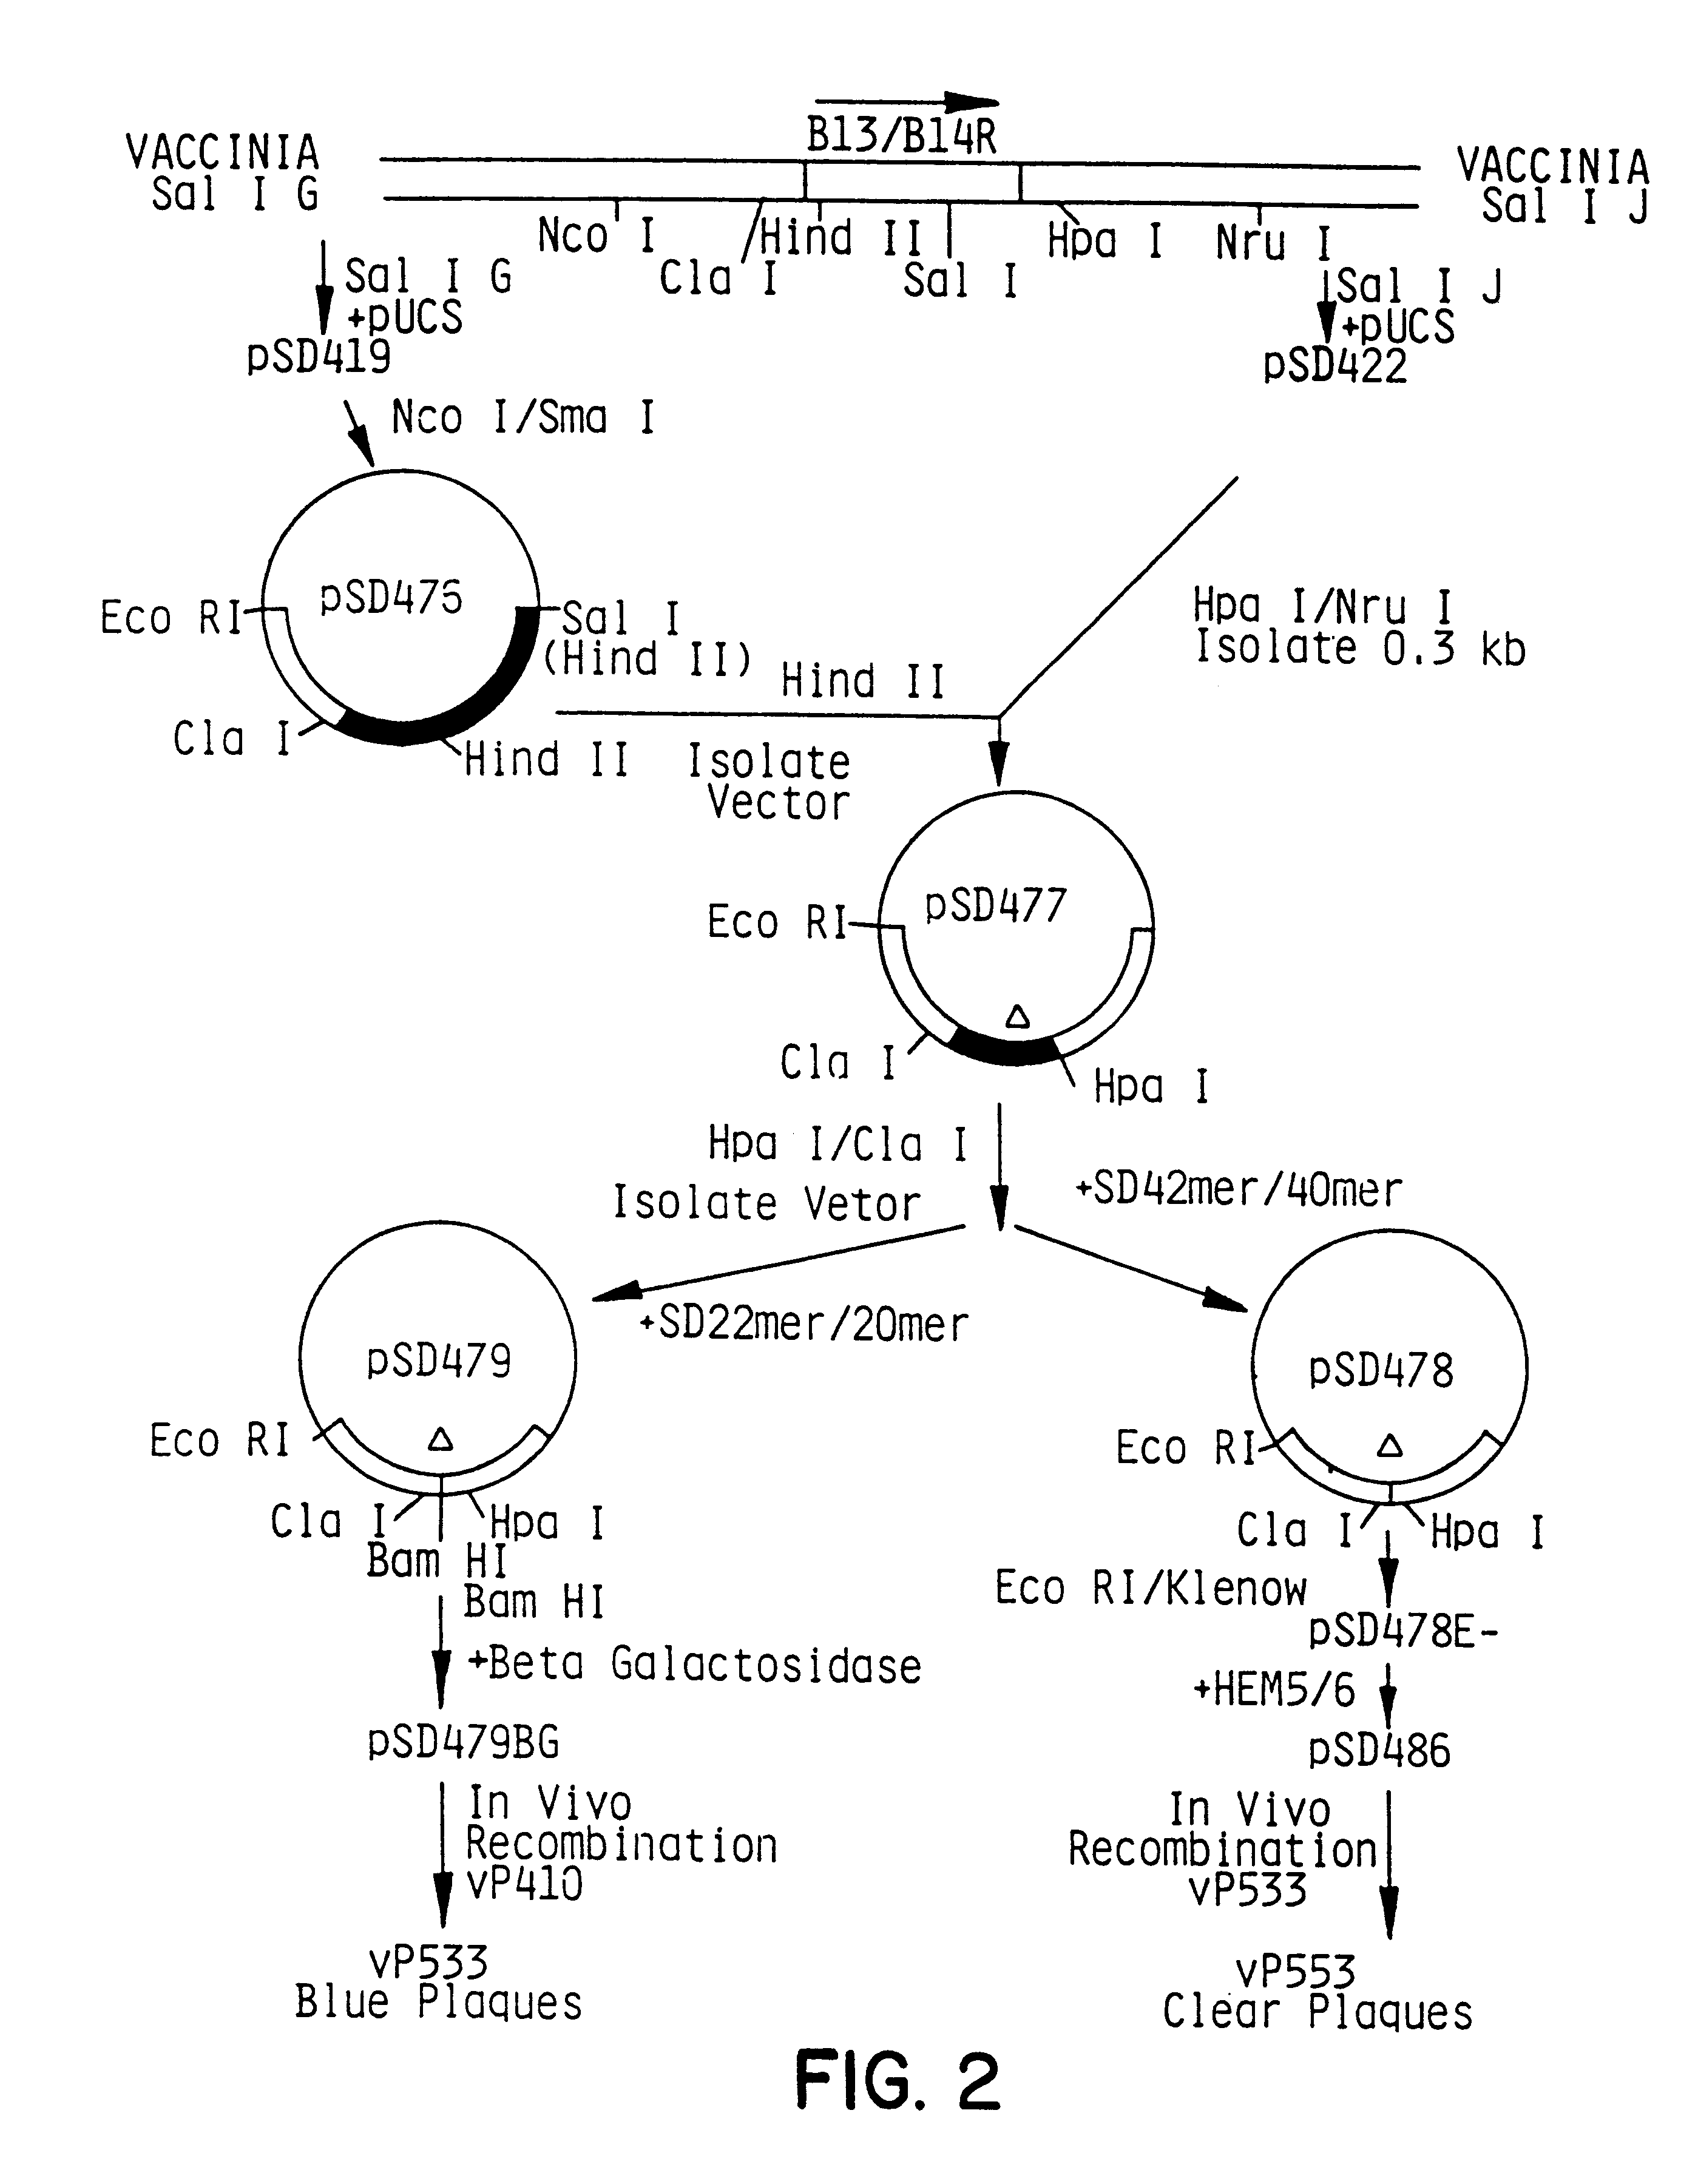 Recombinant poxvirus-cytomegalovirus compositions and uses